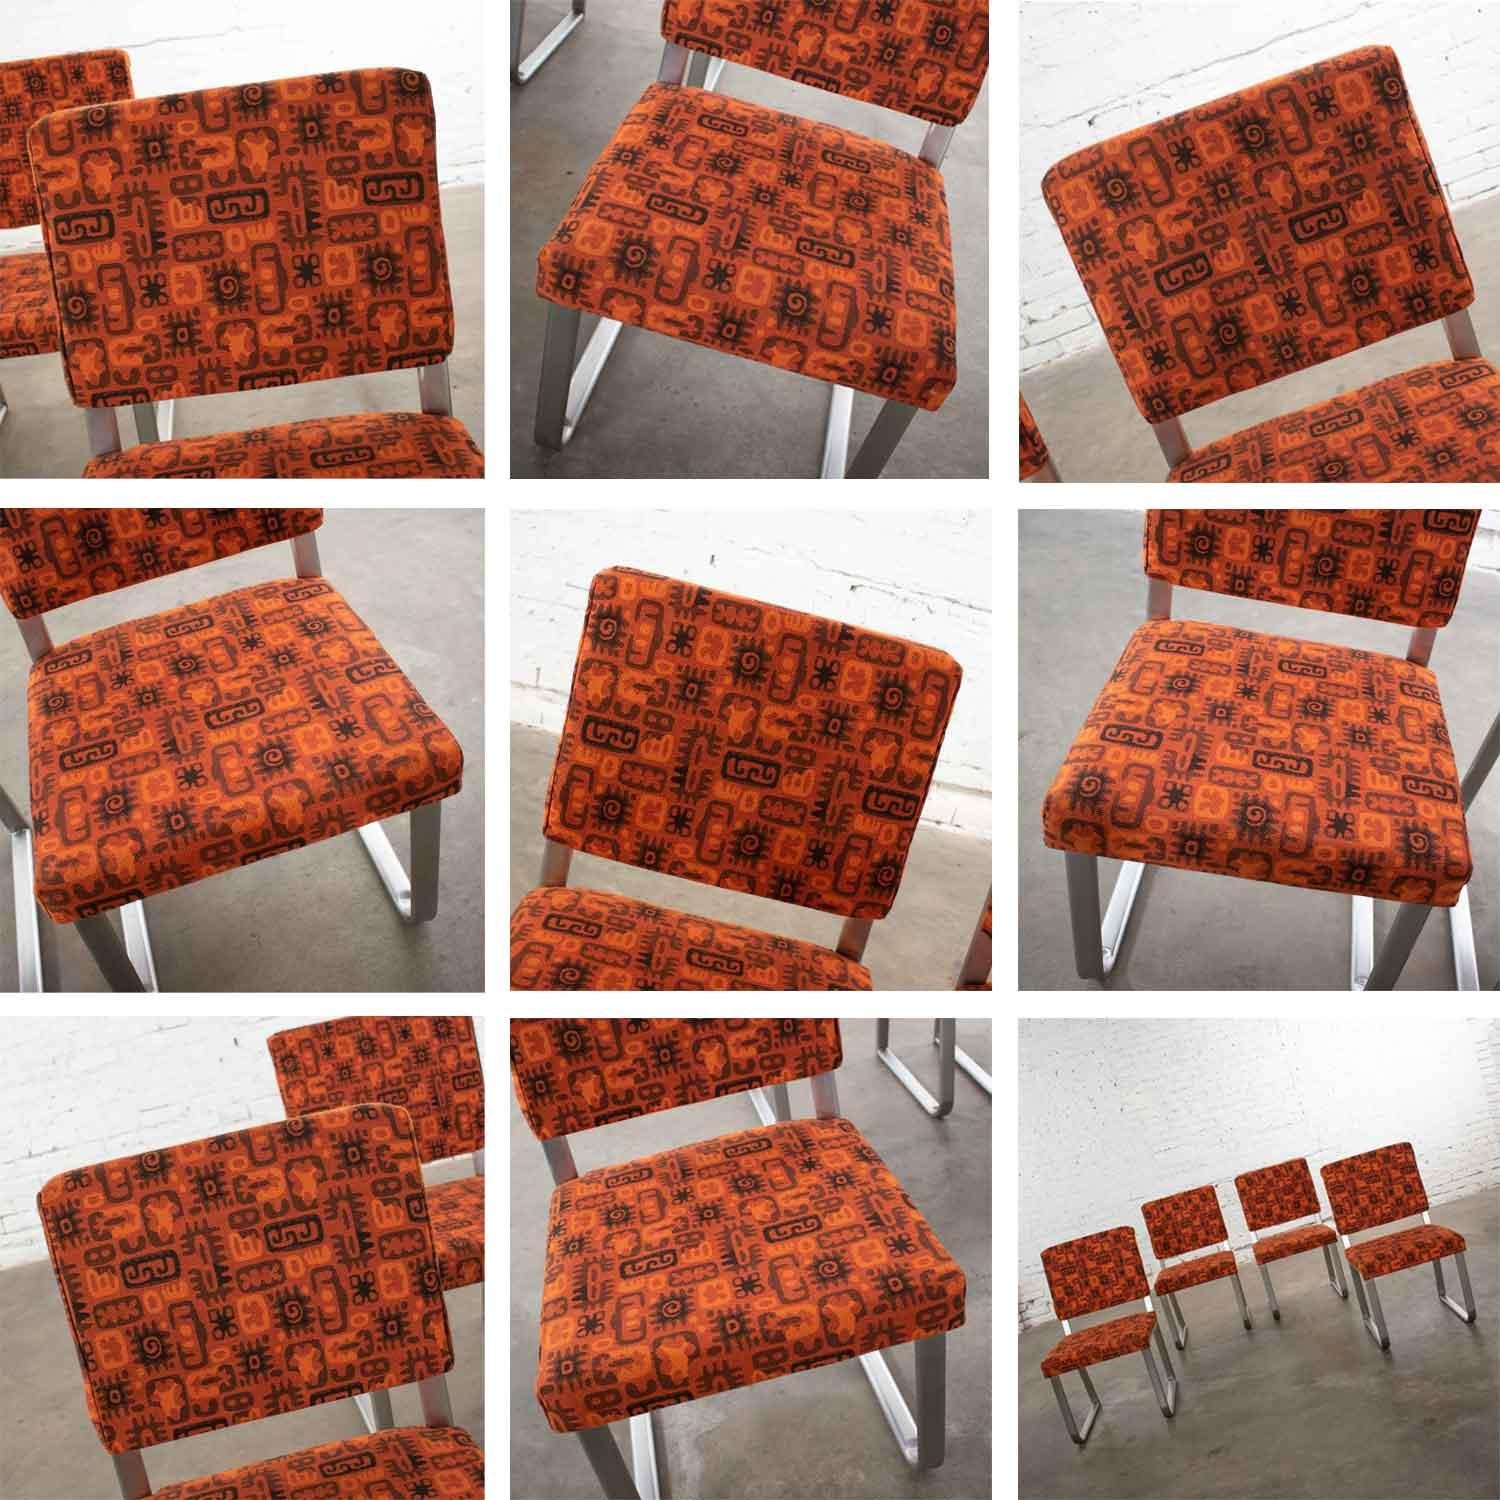 4 Streamline Modern Railroad Dining Car Chairs Stainless Steel and Orange Fabric For Sale 5